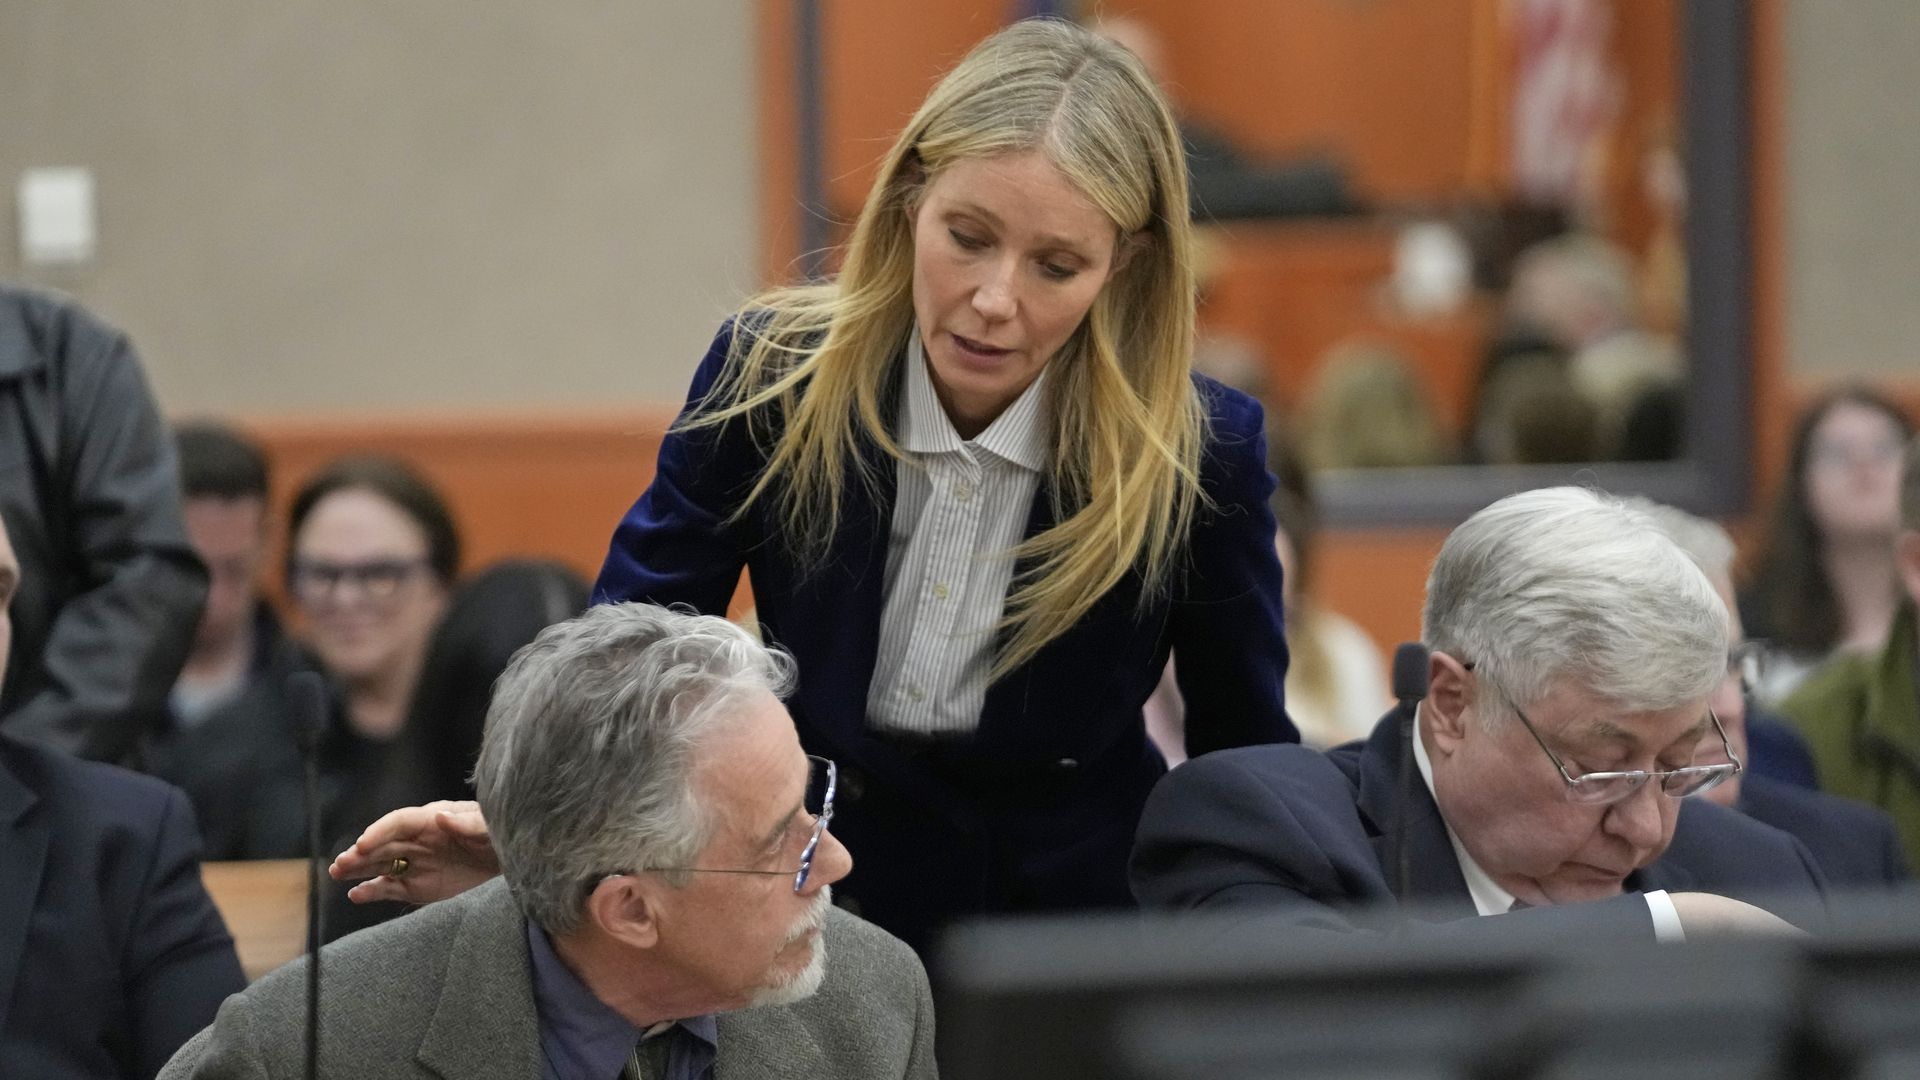 Actor Gwyneth Paltrow speaks with retired optometrist Terry Sanderson after the verdict was read in his $300,000 suit against her over a skiing accident.